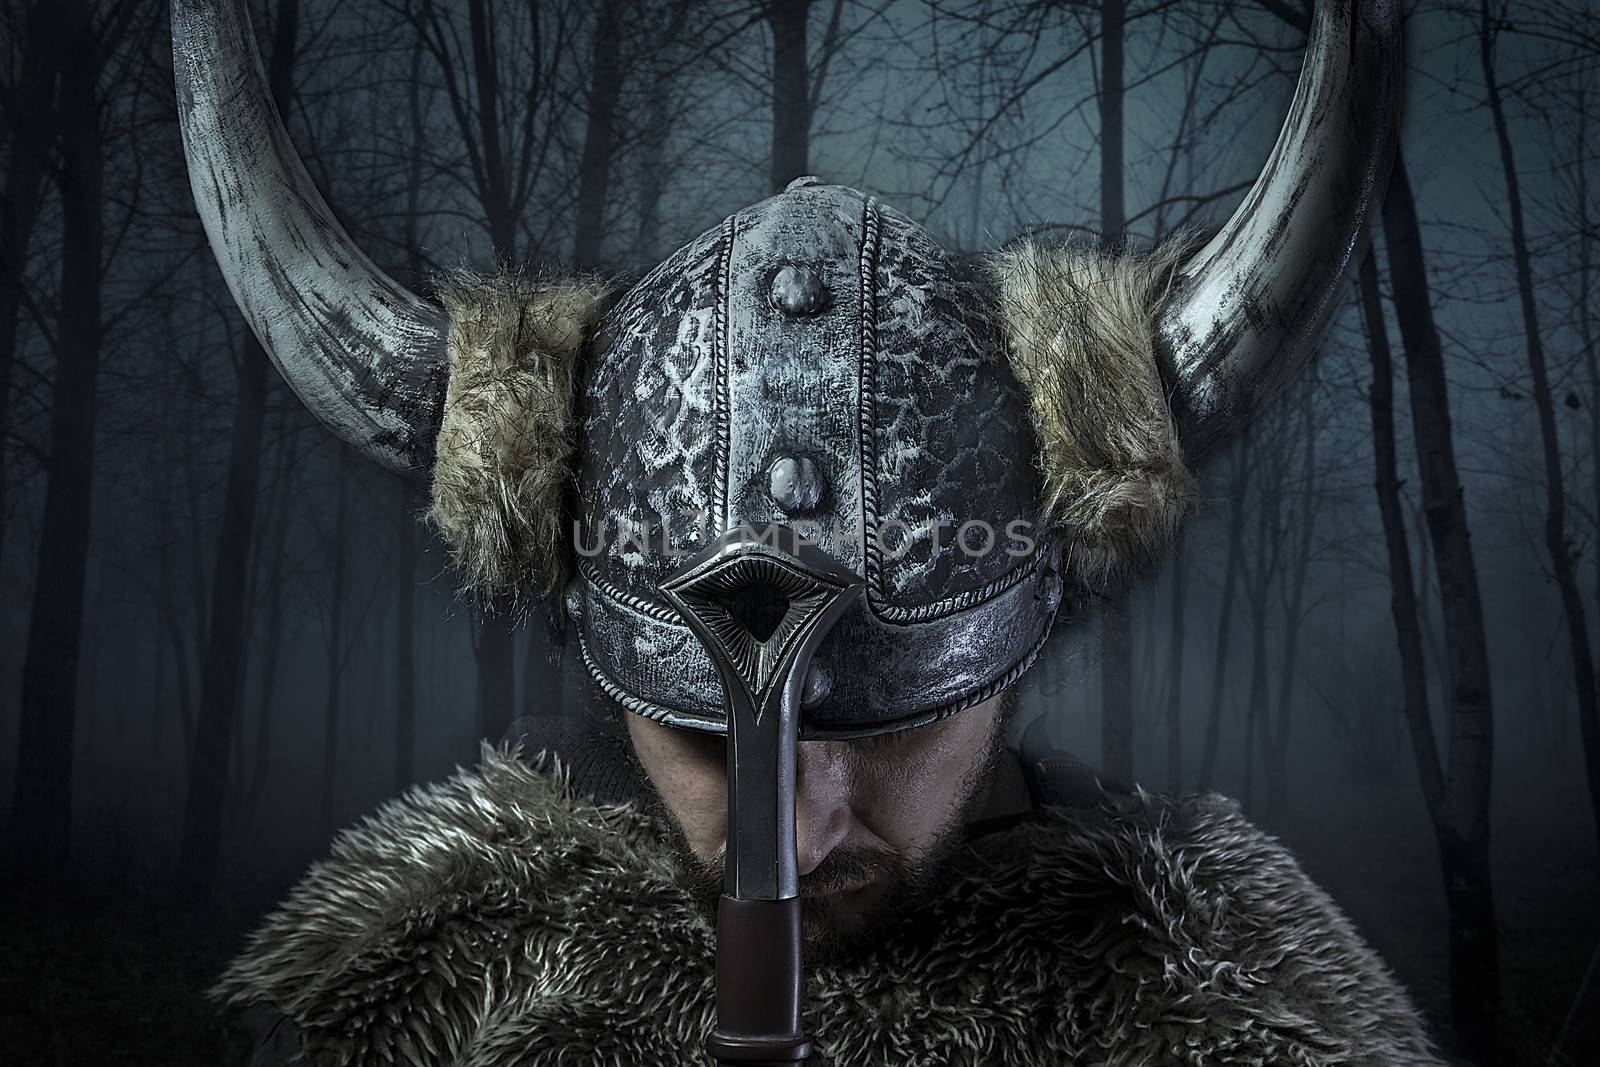 Peace, Viking warrior, male dressed in Barbarian style with sword, bearded